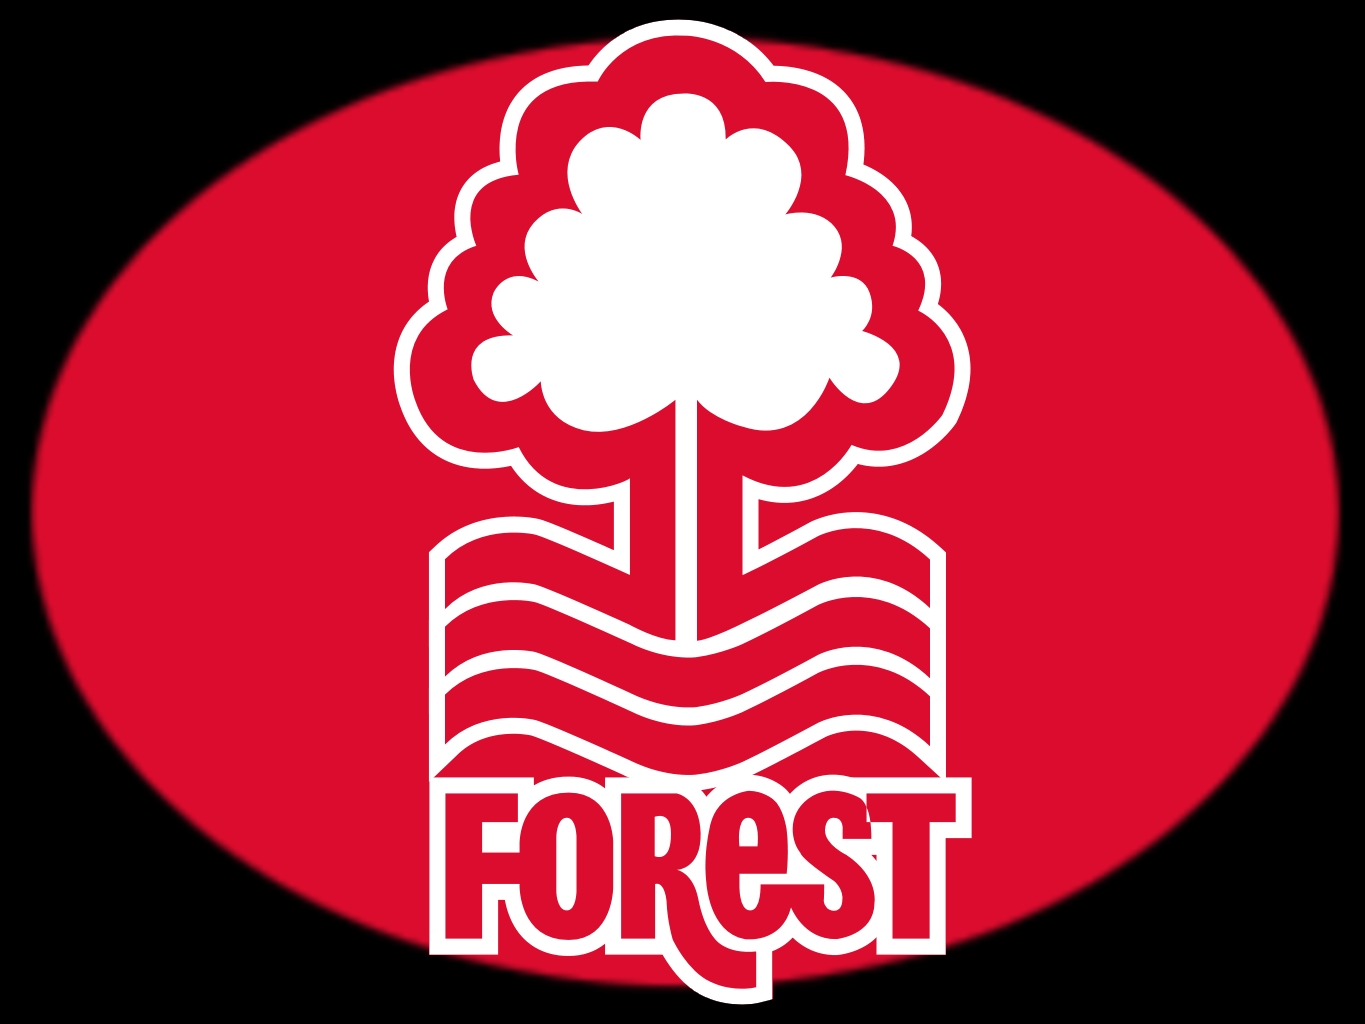 JUST IN; Chris Sutton predicts who will win this weekend – Aston Villa or Nottingham Forest